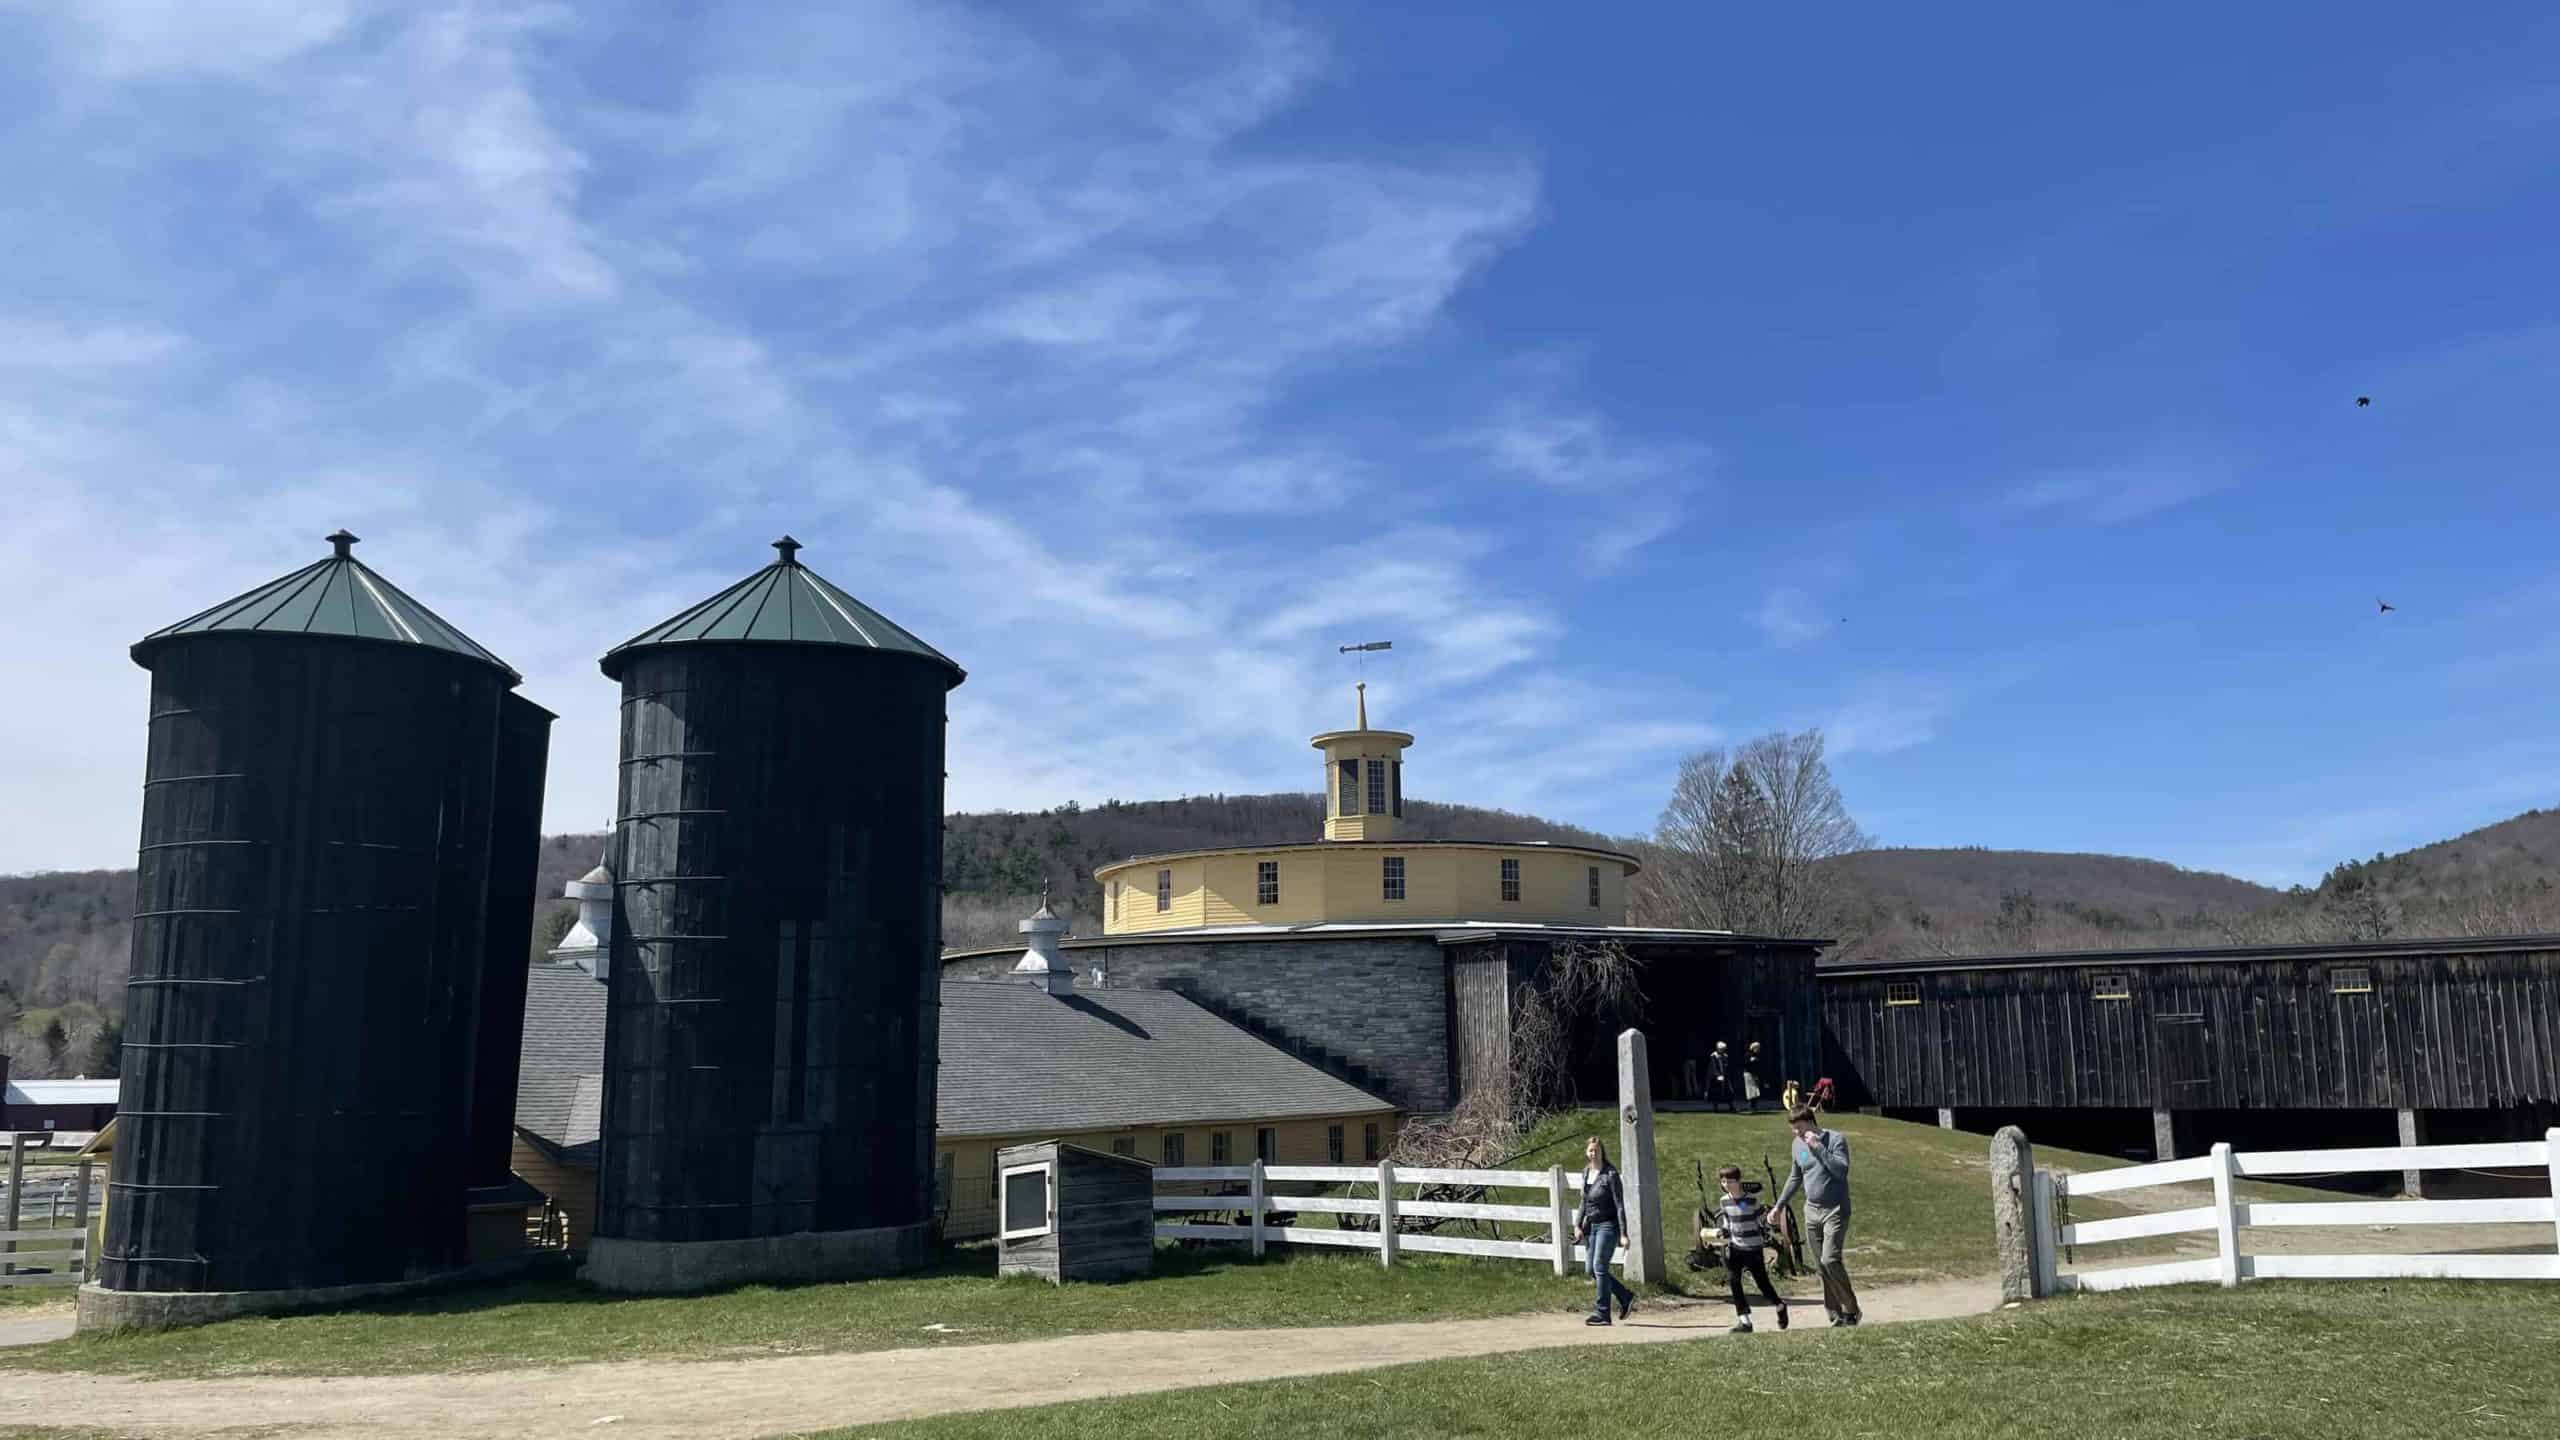 The Round Stone Barn catches sunlight on a spring day at Hancock Shaker Village.